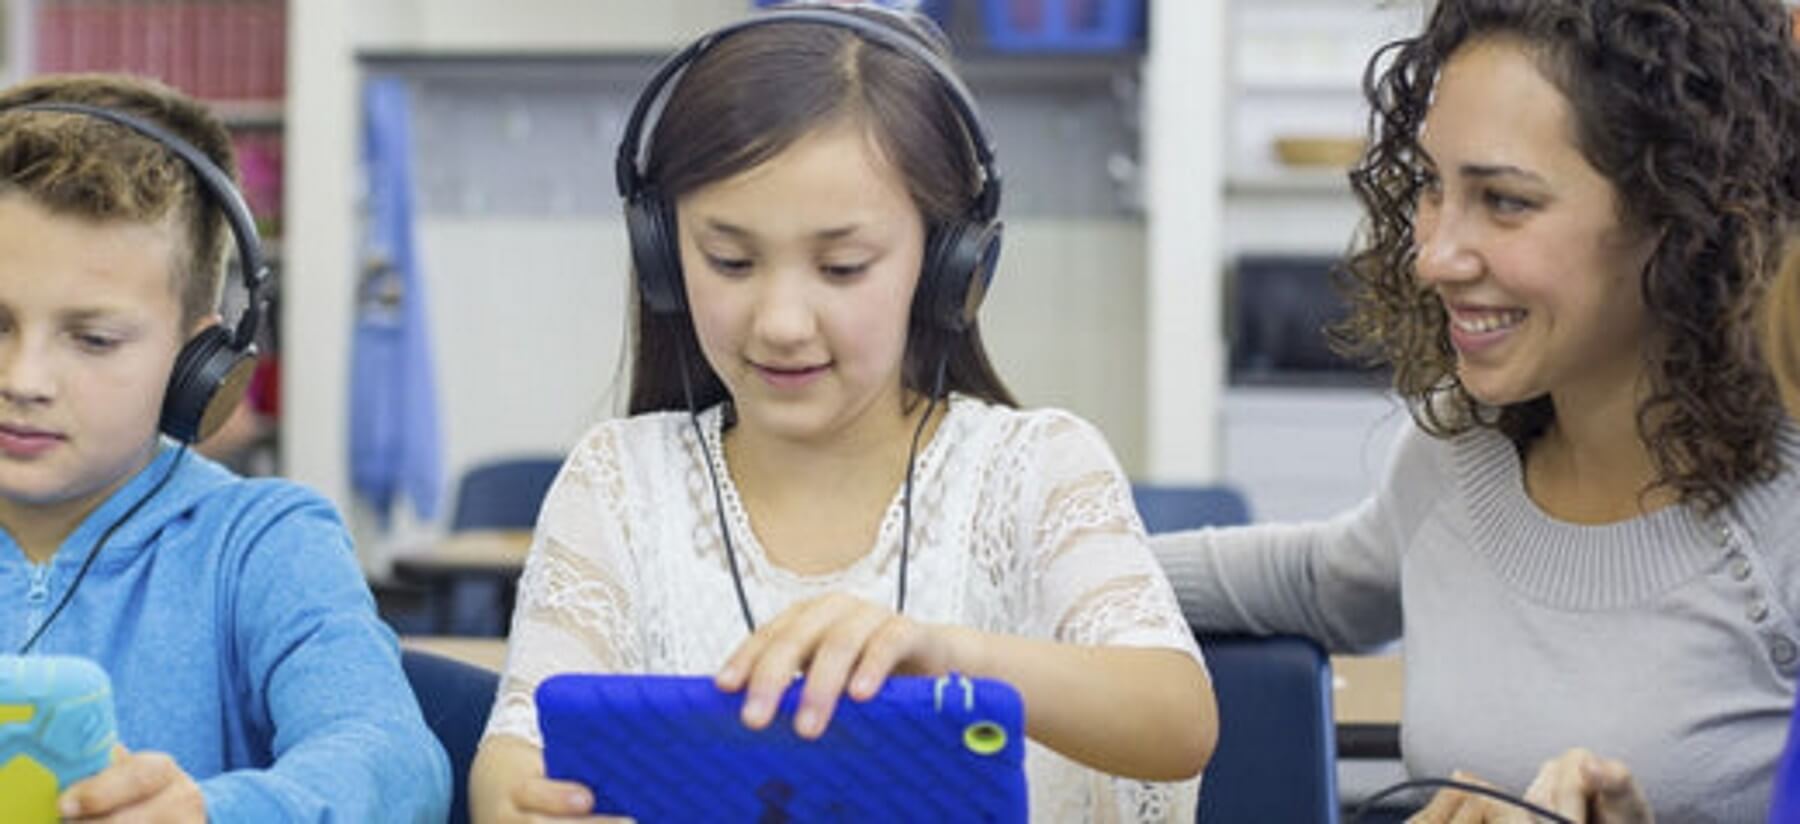 Learning Headphones writes about the benefits of using classroom headphones for students. From improvements in concentration to a decrease in distractions, there are plenty of reasons to give them a try!